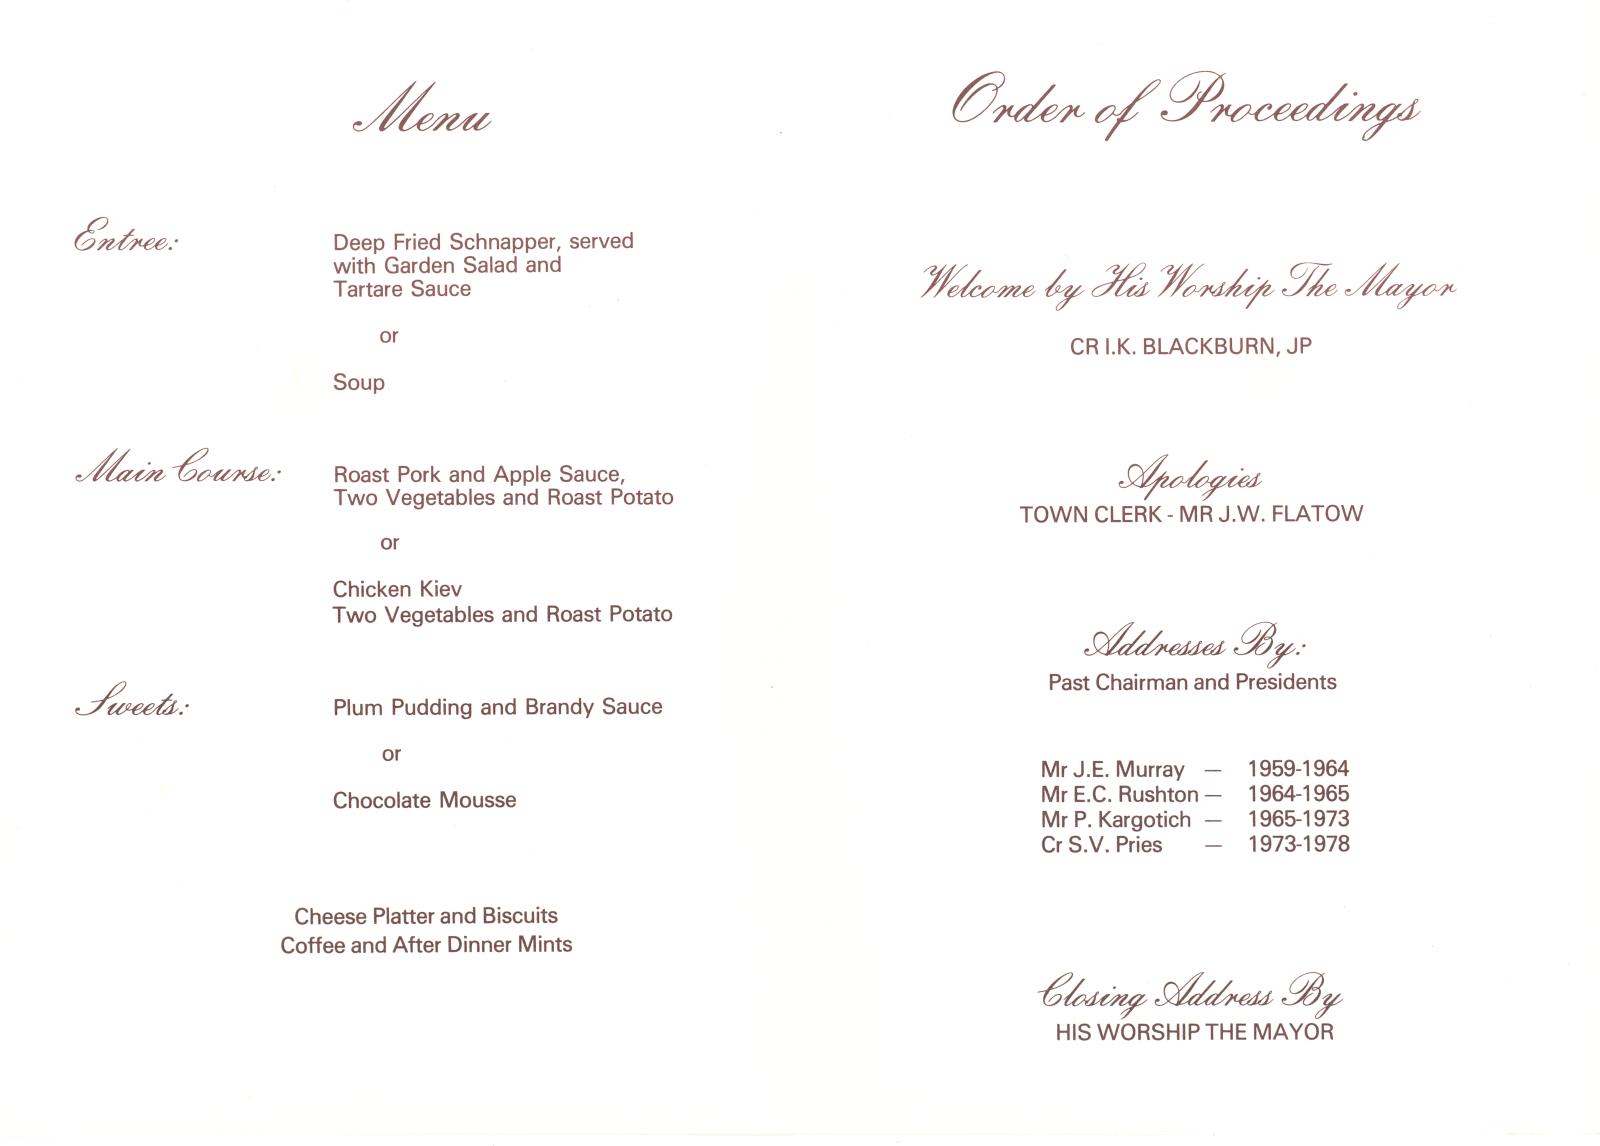 Inside page of Celebration Dinner Program with text printed in brown ink. On the left of the page is the menu of the celebration dinner, while on the right side is the order of proceedings